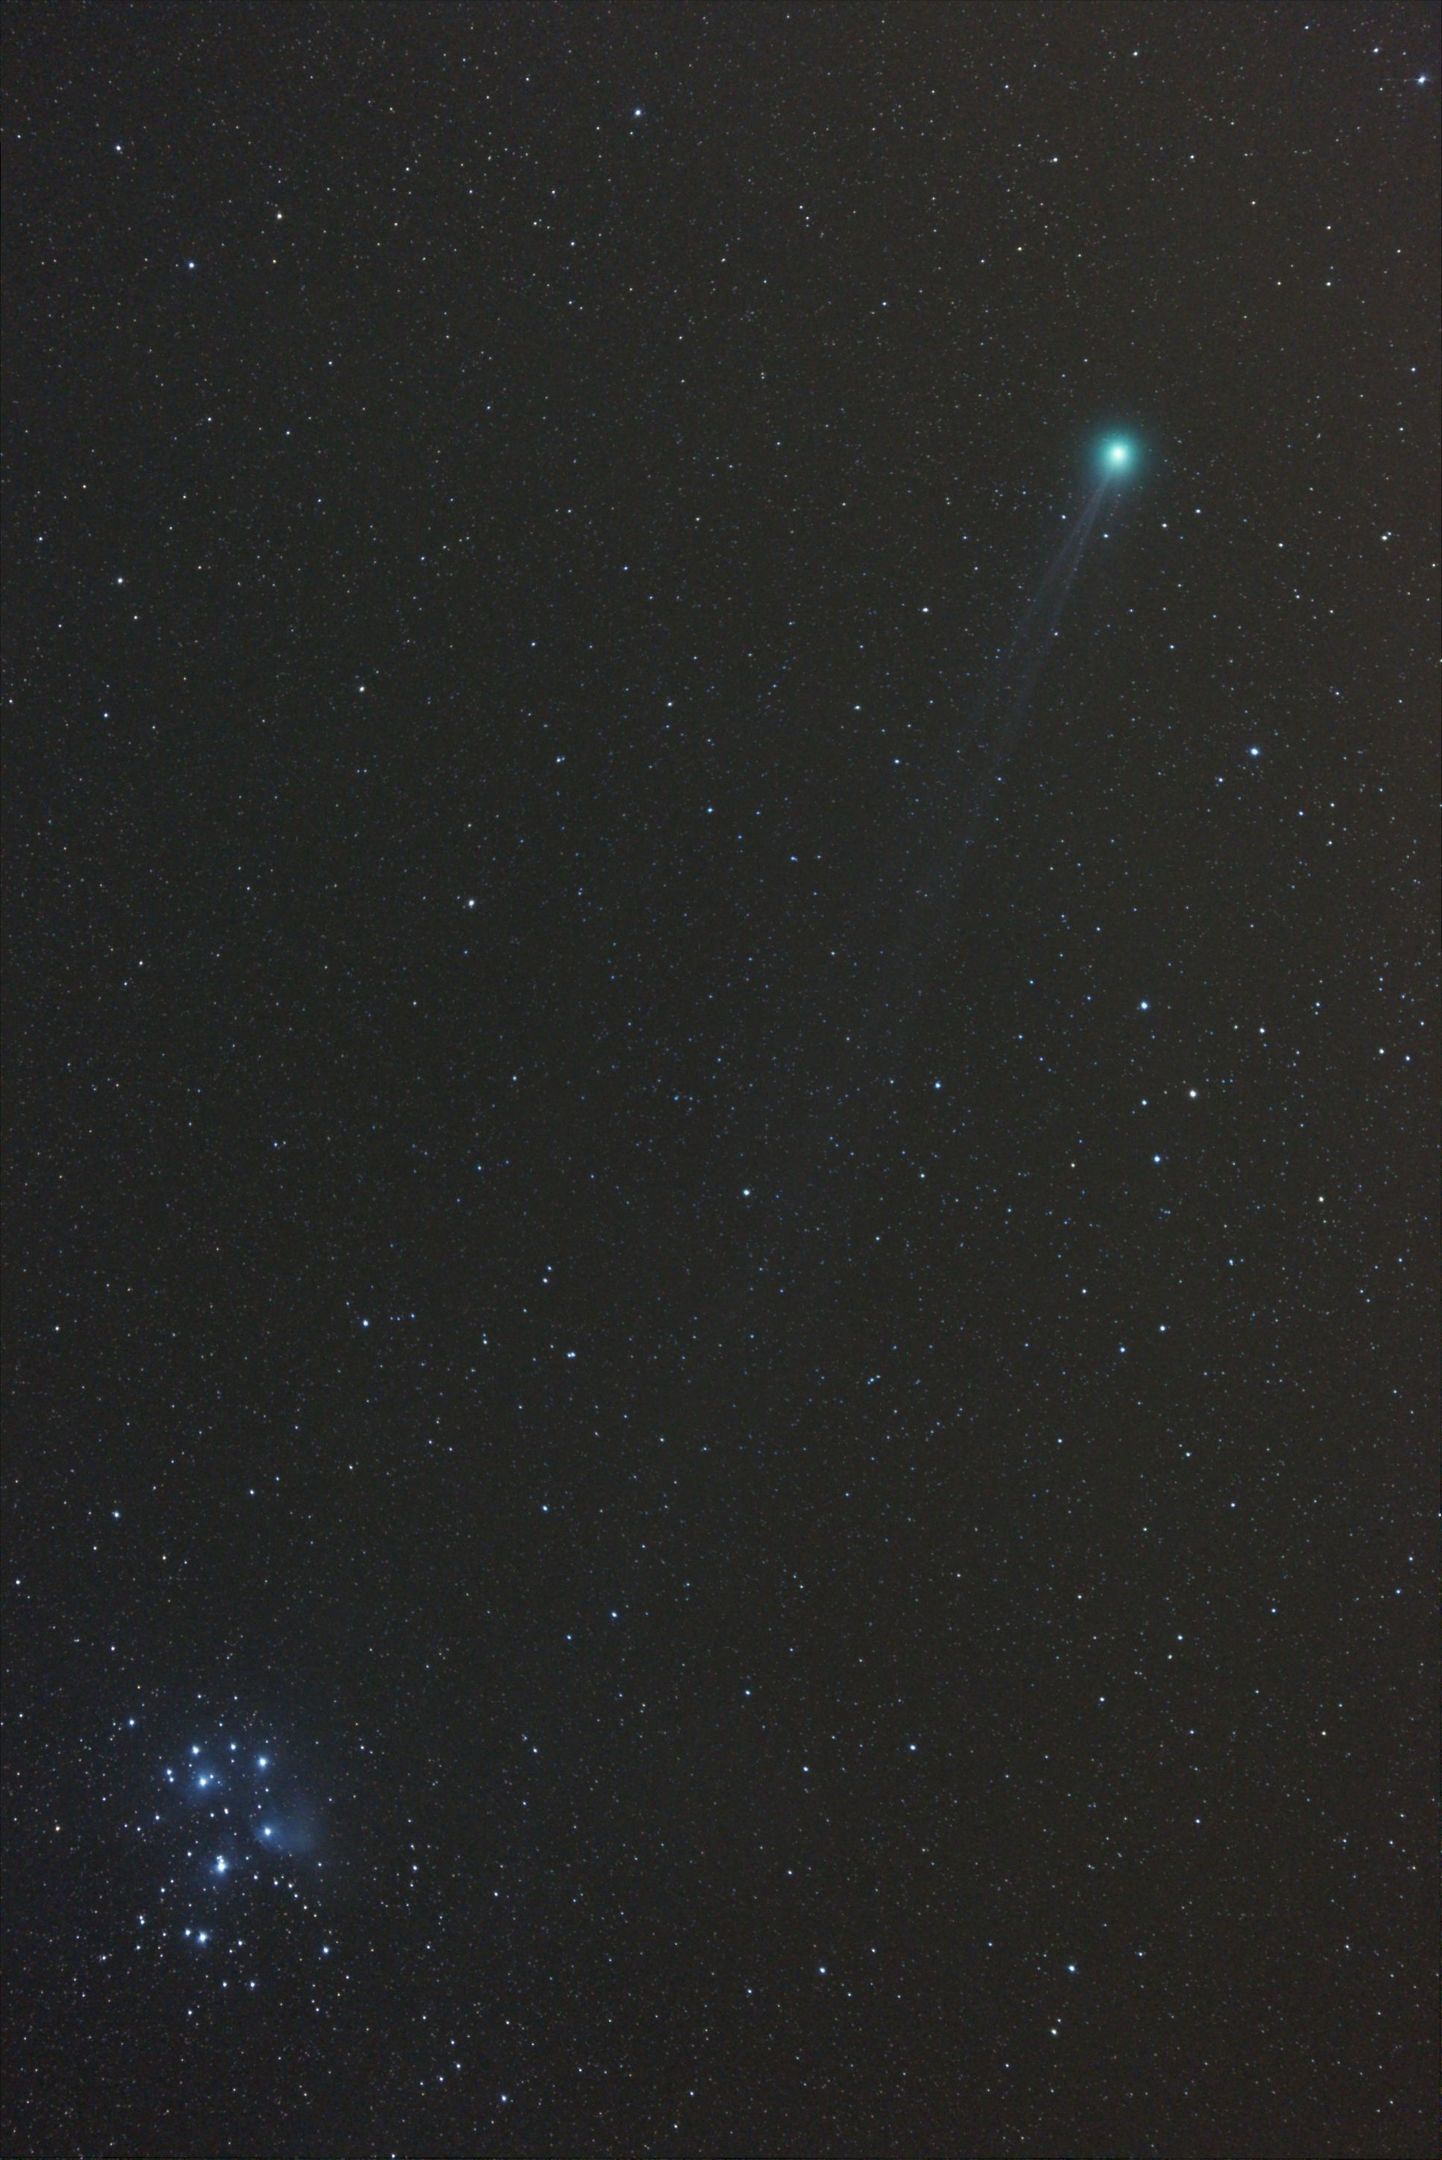 Comet Lovejoy, spotted just south of Stonehaven by Neal Weston of the Aberdeen Astronomical Society.